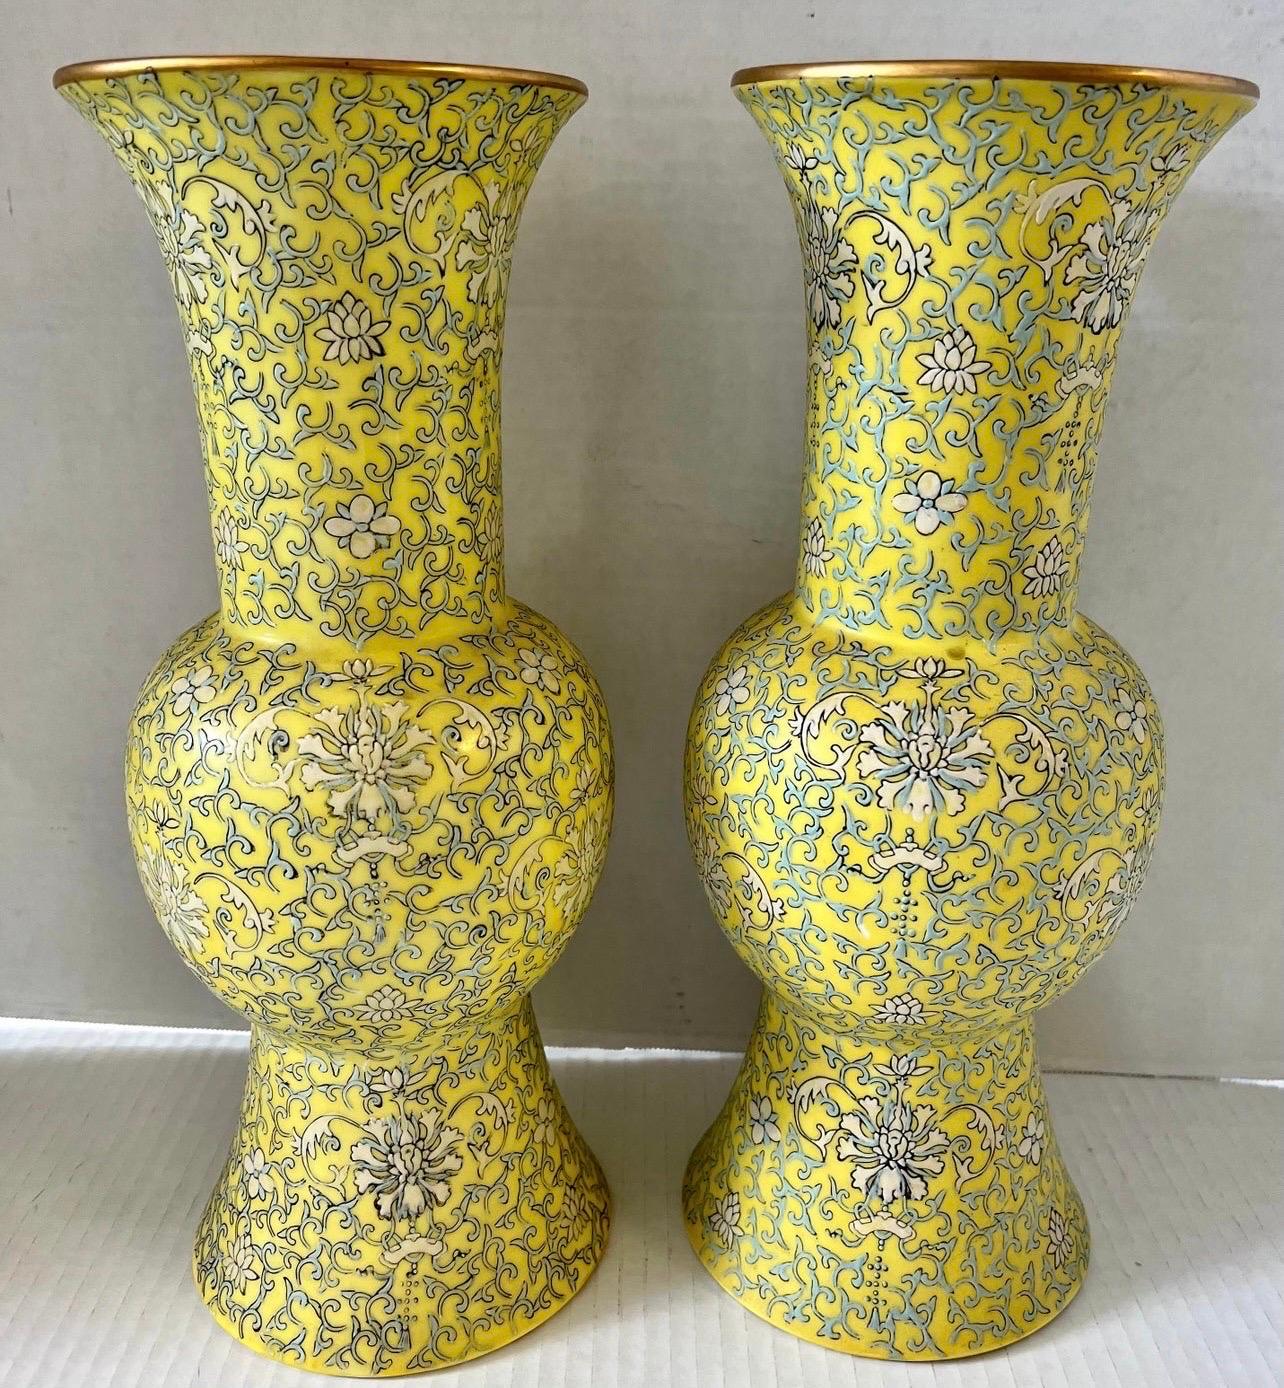 Chinoiserie Japanese Coveted Yellow Porcelain Three Piece Set Bowl & Pair of Vases Matching